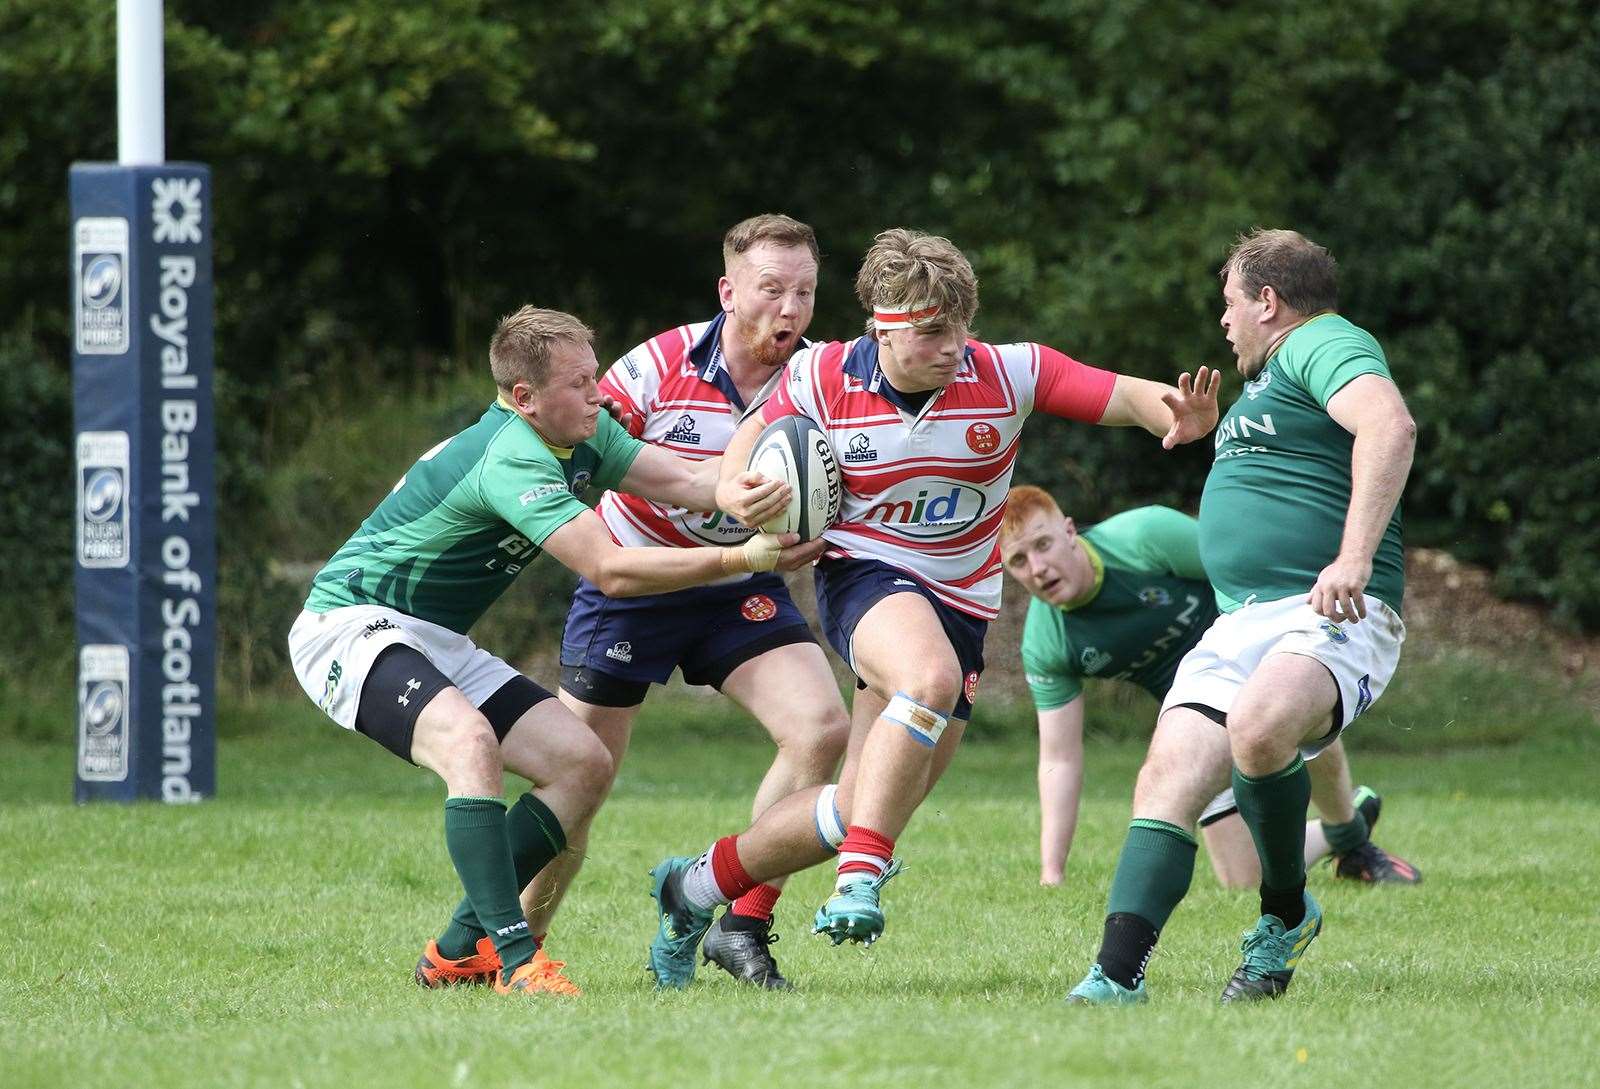 Euan Lee takes on defence. Kris Morrison supporting. Picture: John MacGregor